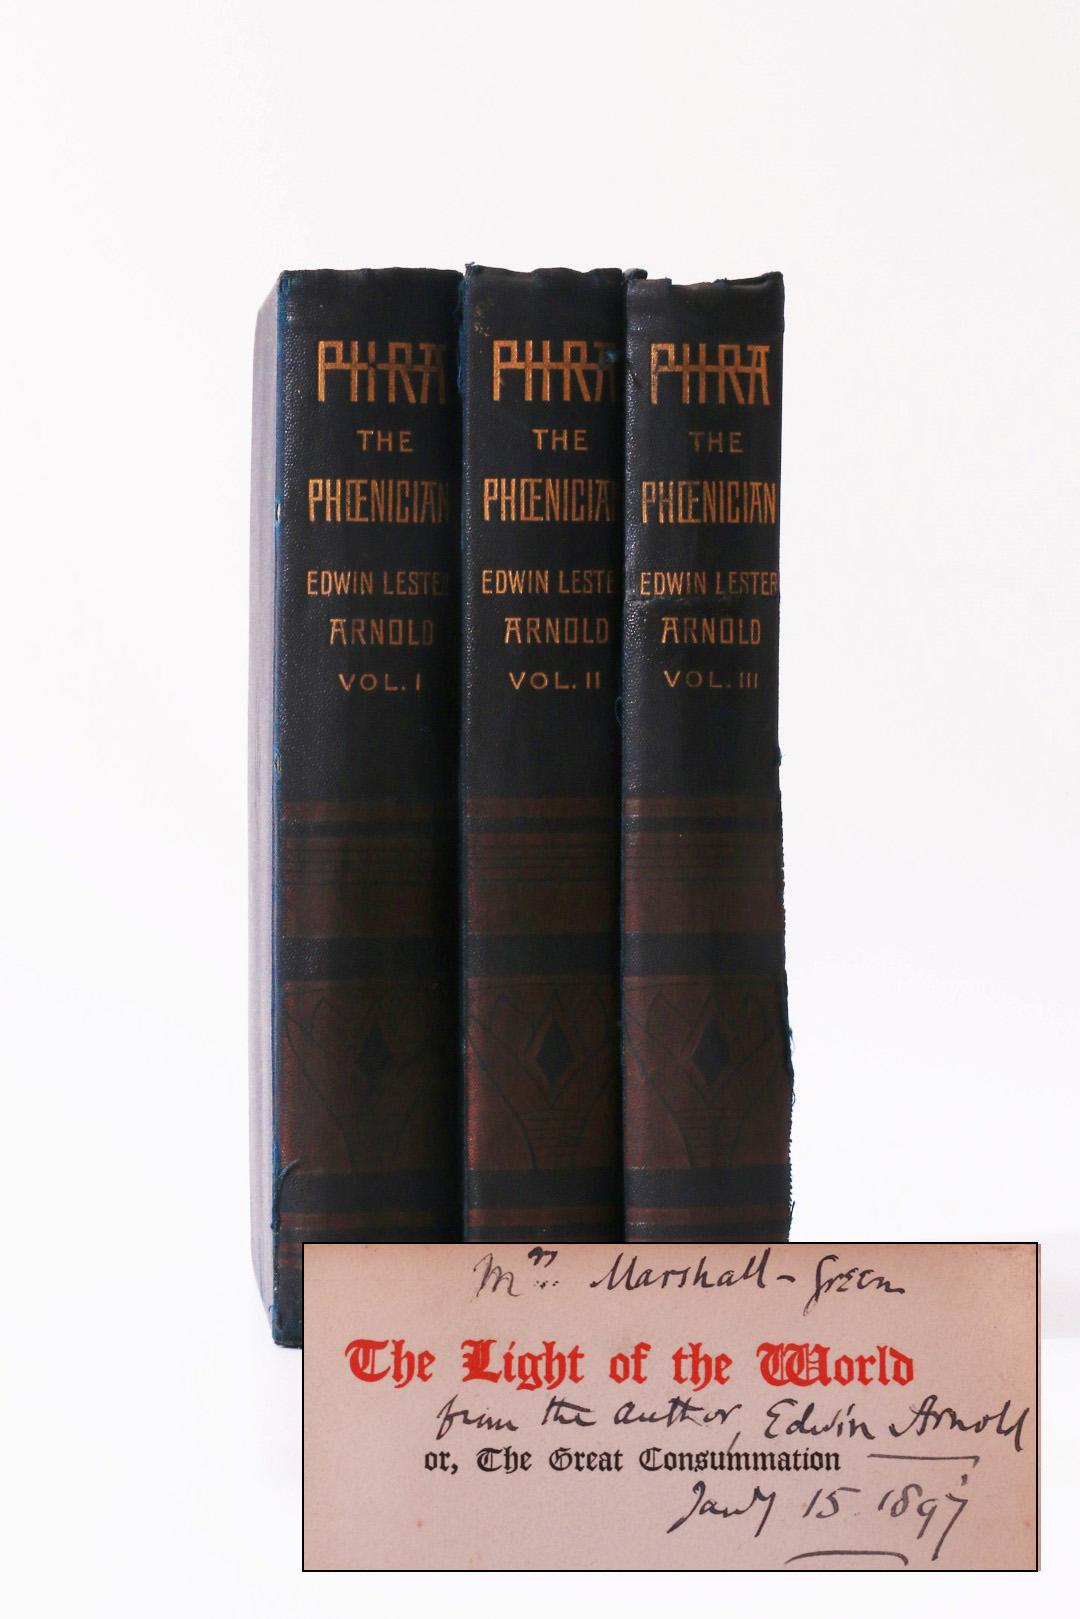 Edwin Lester Arnold - The Wonderful Adventures of Phra the Phoenician - Chatto & Windus, 1891 [1890], Signed First Edition.